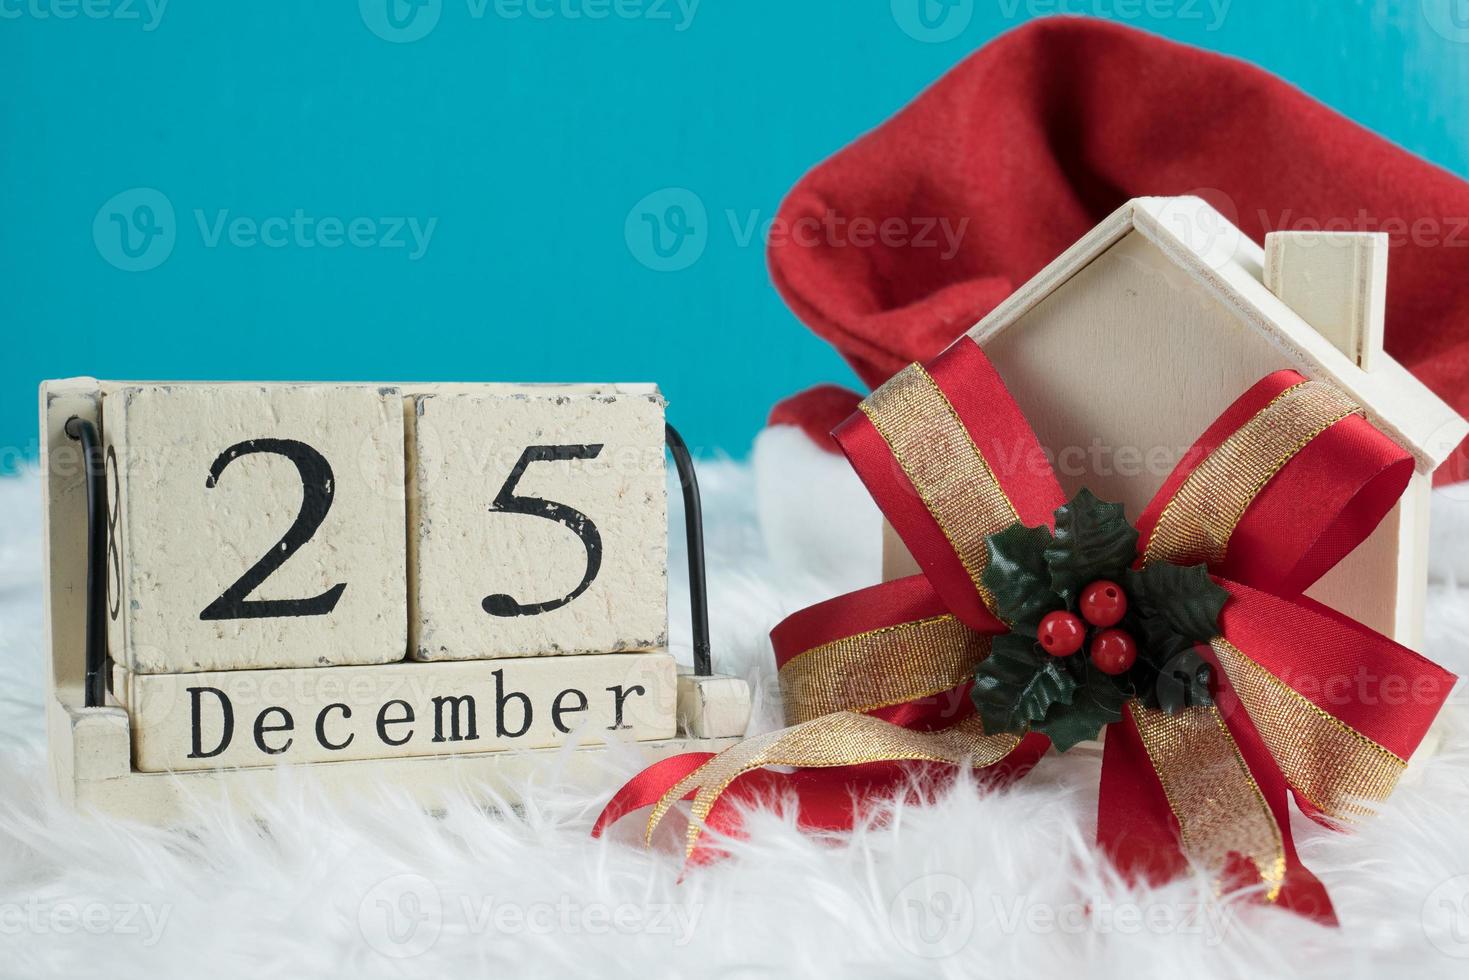 Christmas day theme decoration with hat santa,wooden toy and wood cube block calendar present date 25 and month December.copy space for text.Celebration Christmas and x'mas concept.on green background photo